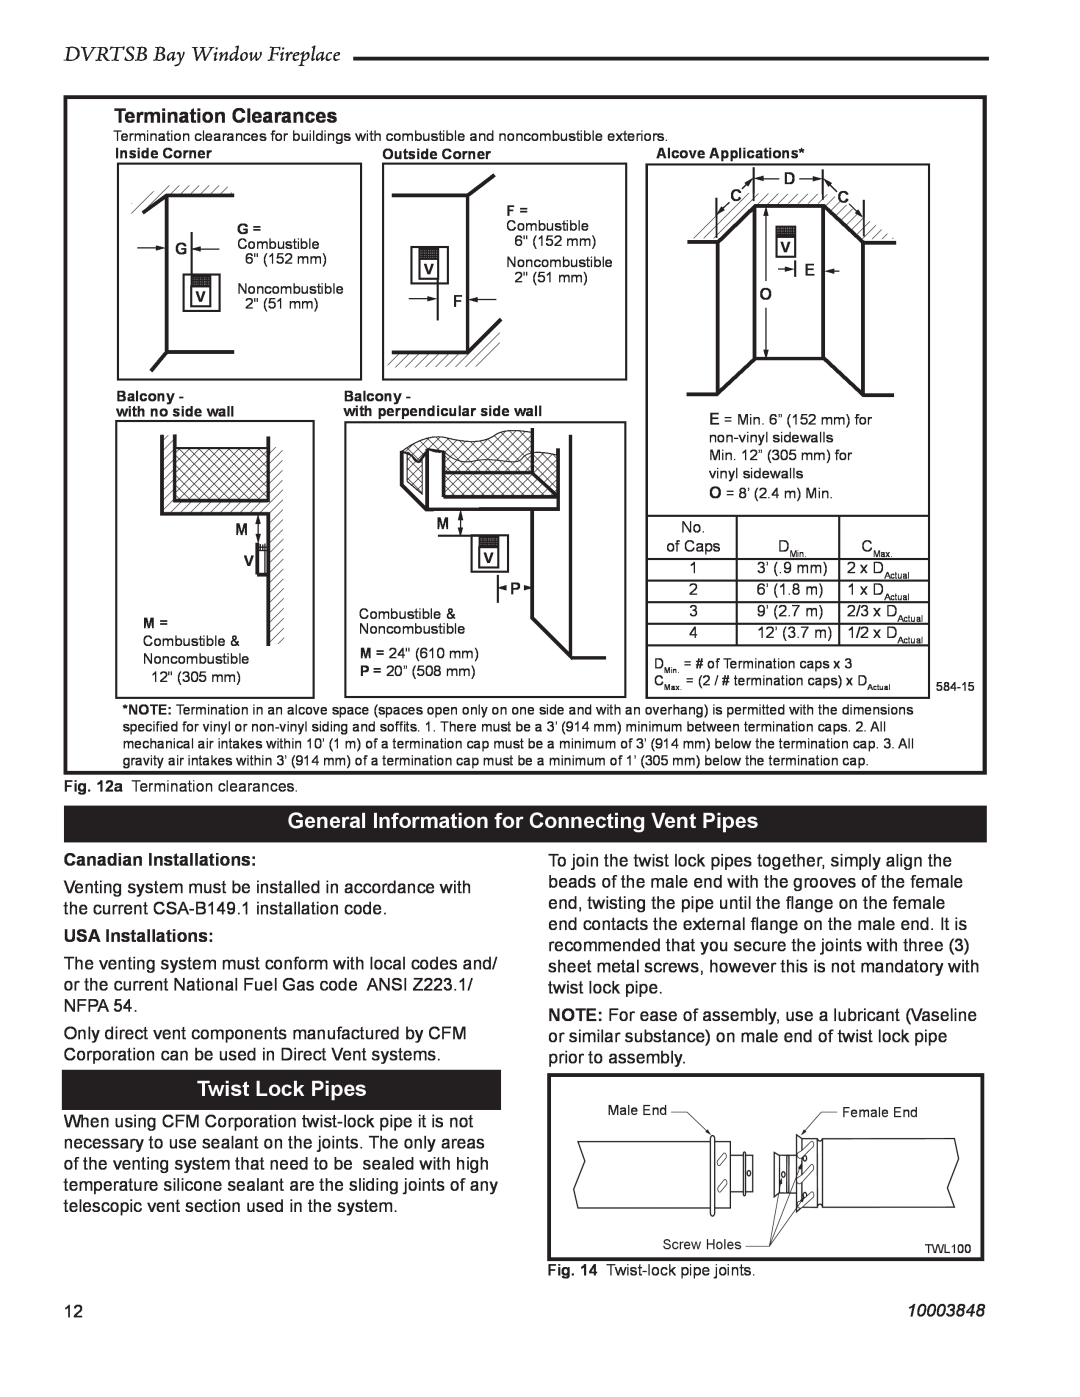 Vermont Casting General Information for Connecting Vent Pipes, Twist Lock Pipes, DVRTSB Bay Window Fireplace, 10003848 